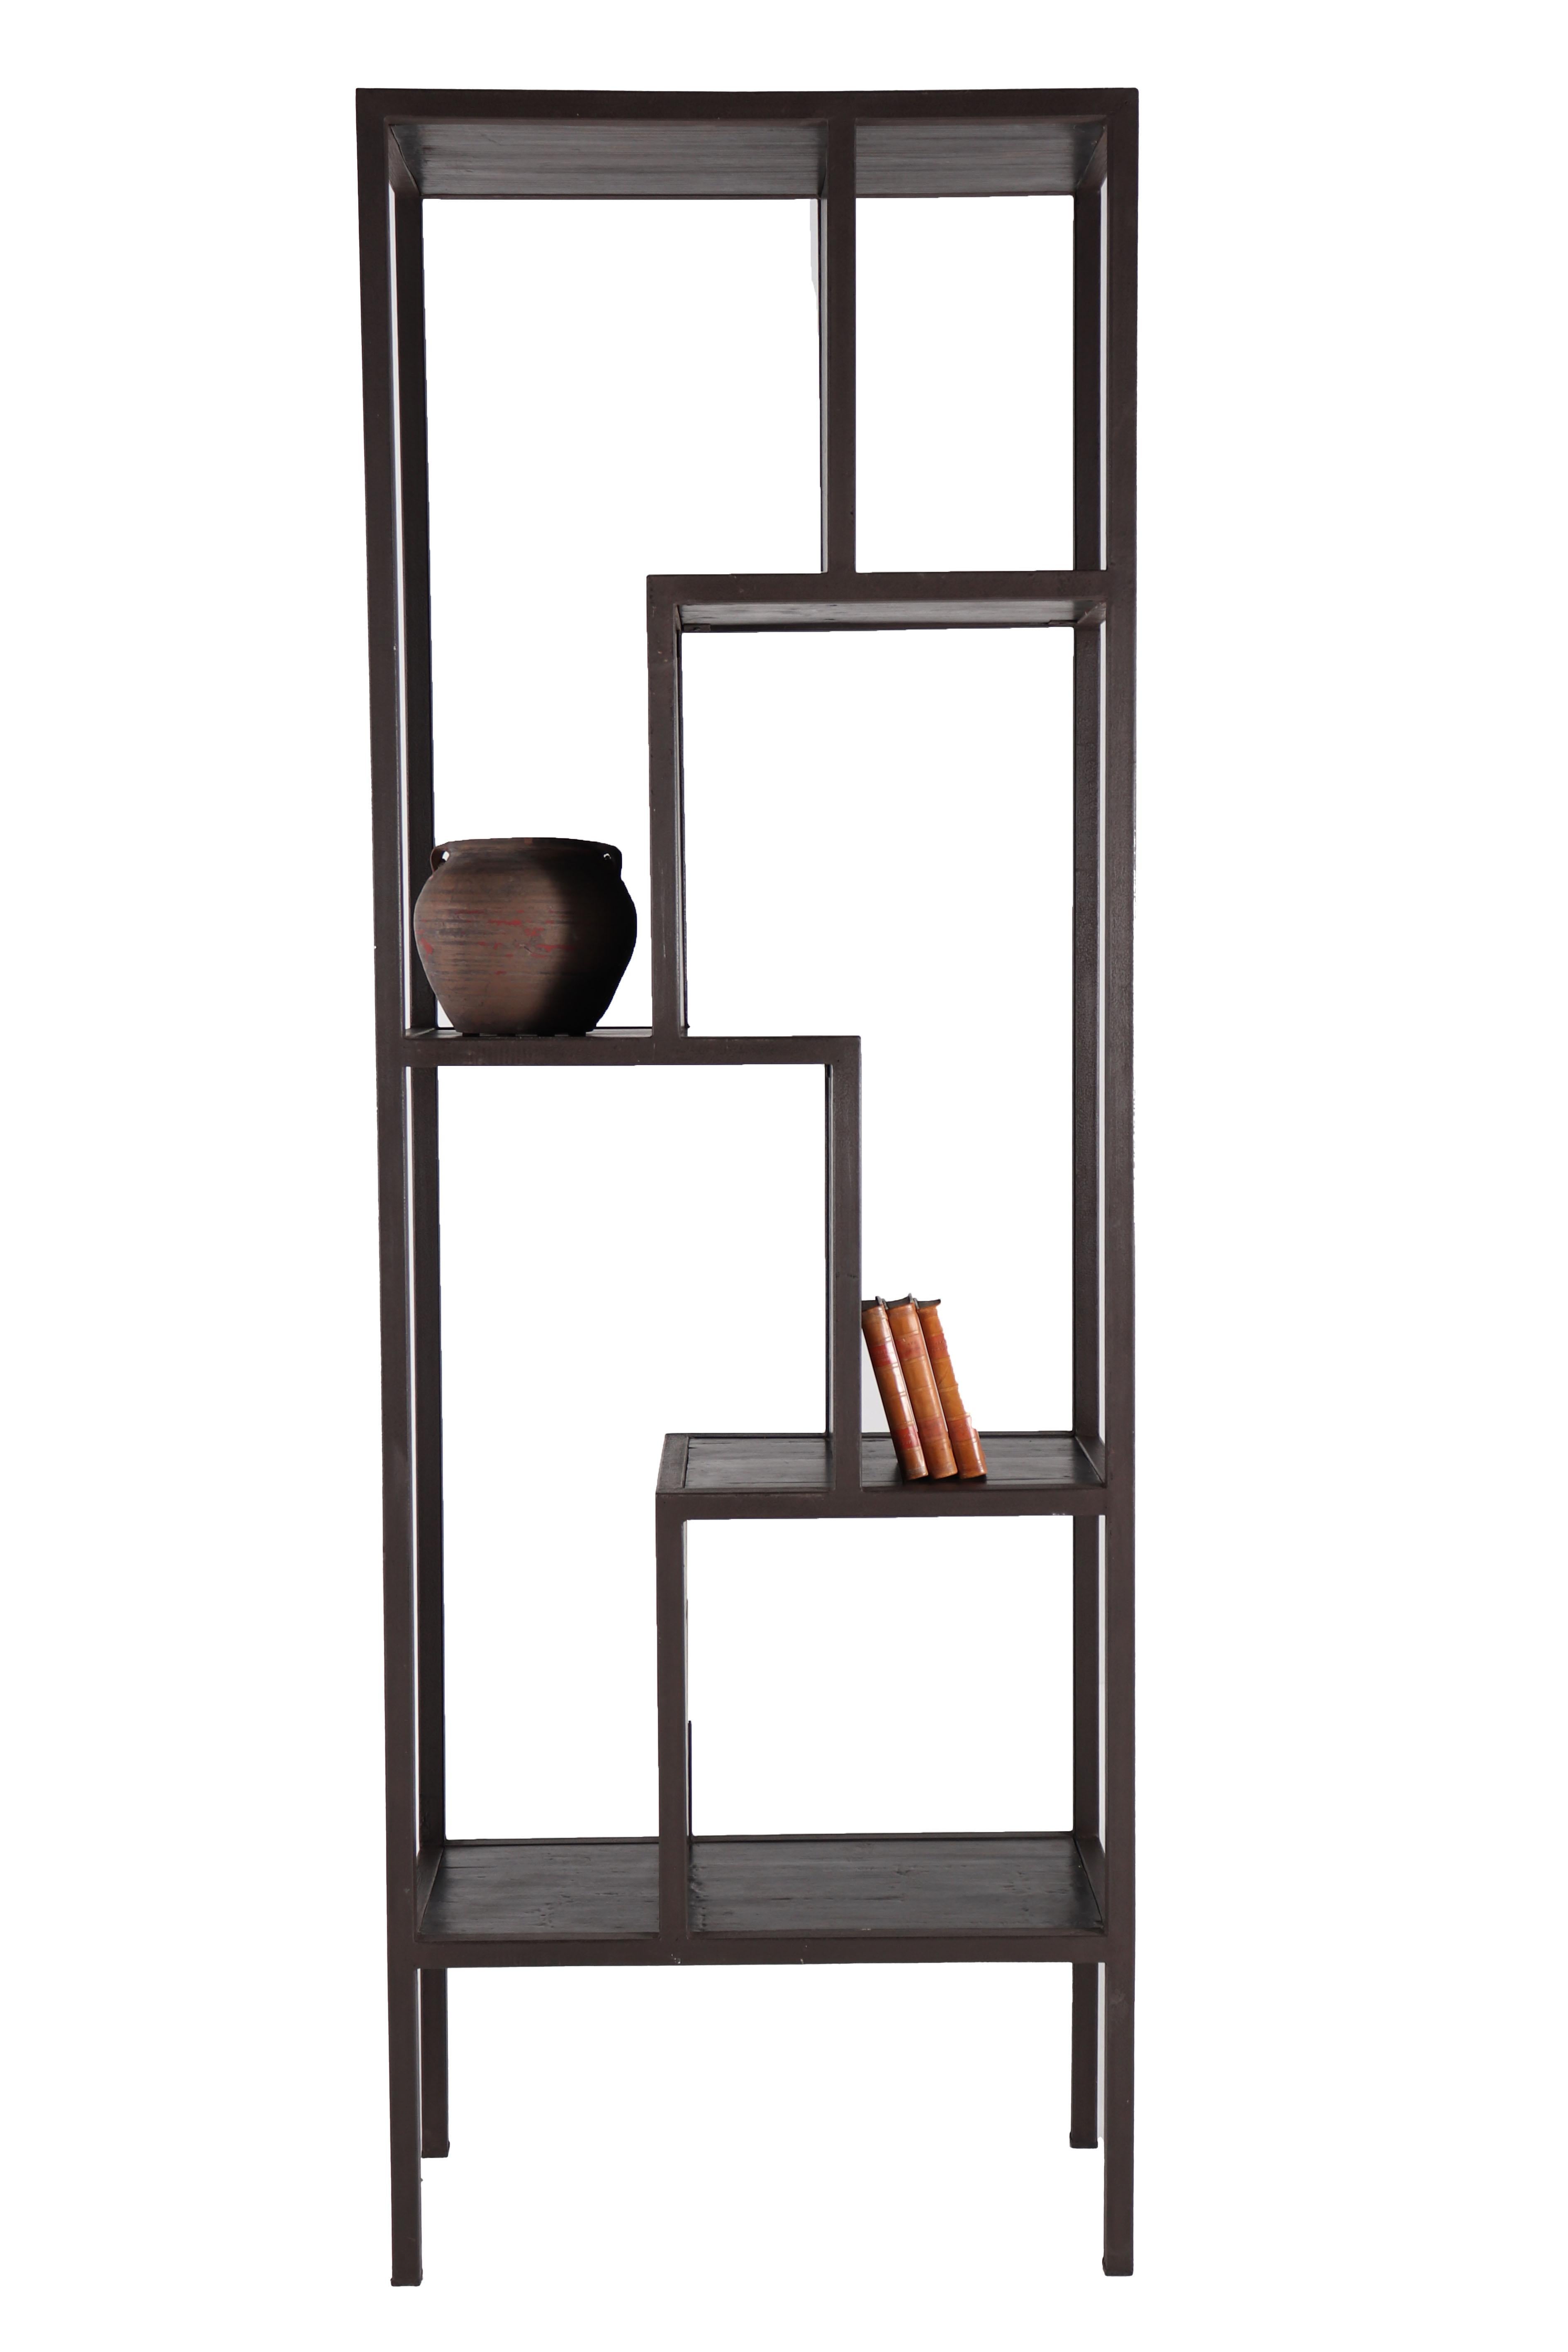 This etagere features staggered shelving, beautifully textured wood shelves and metal frame.